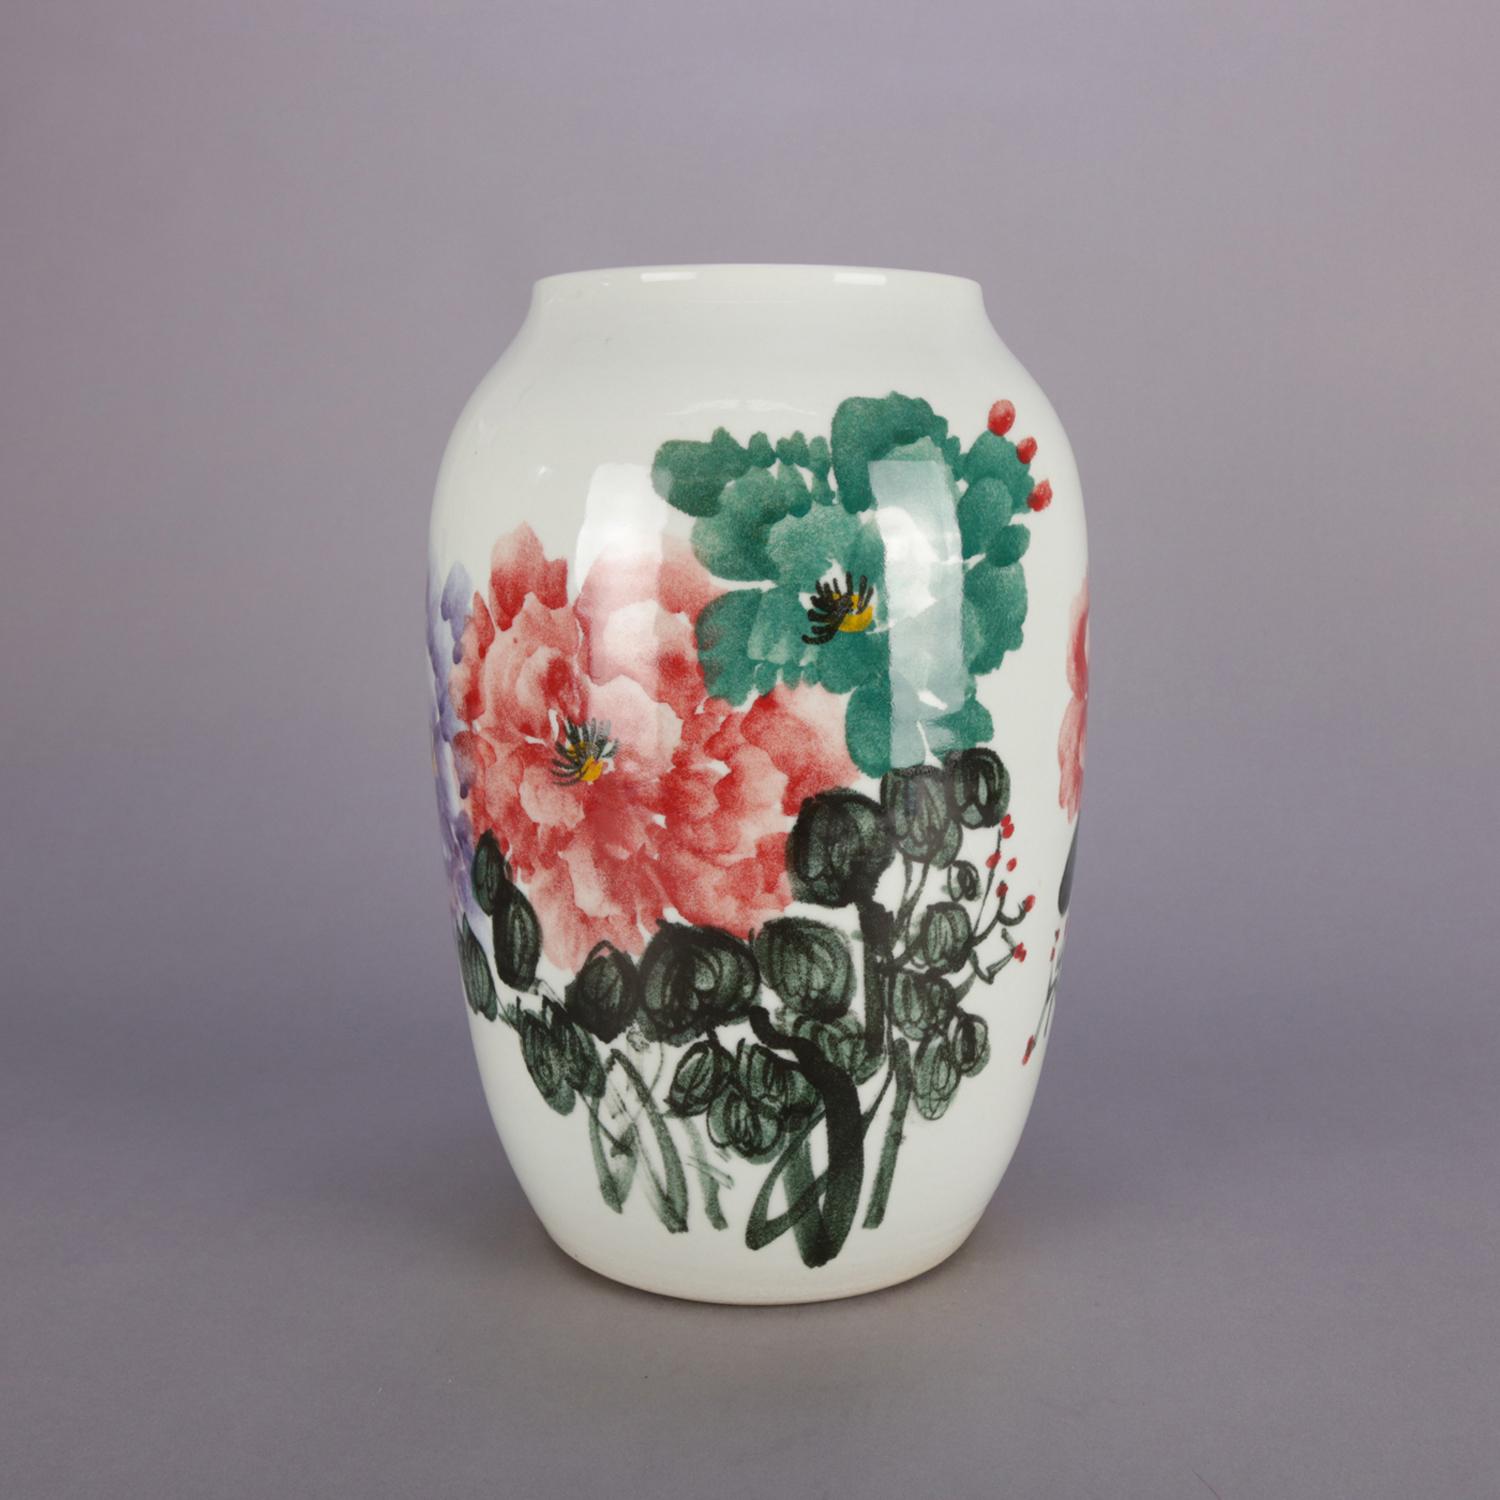 Chinese porcelain vase features hand-painted floral bouquet of peonies with chop mark signing, 20th century

Measures: 13.25